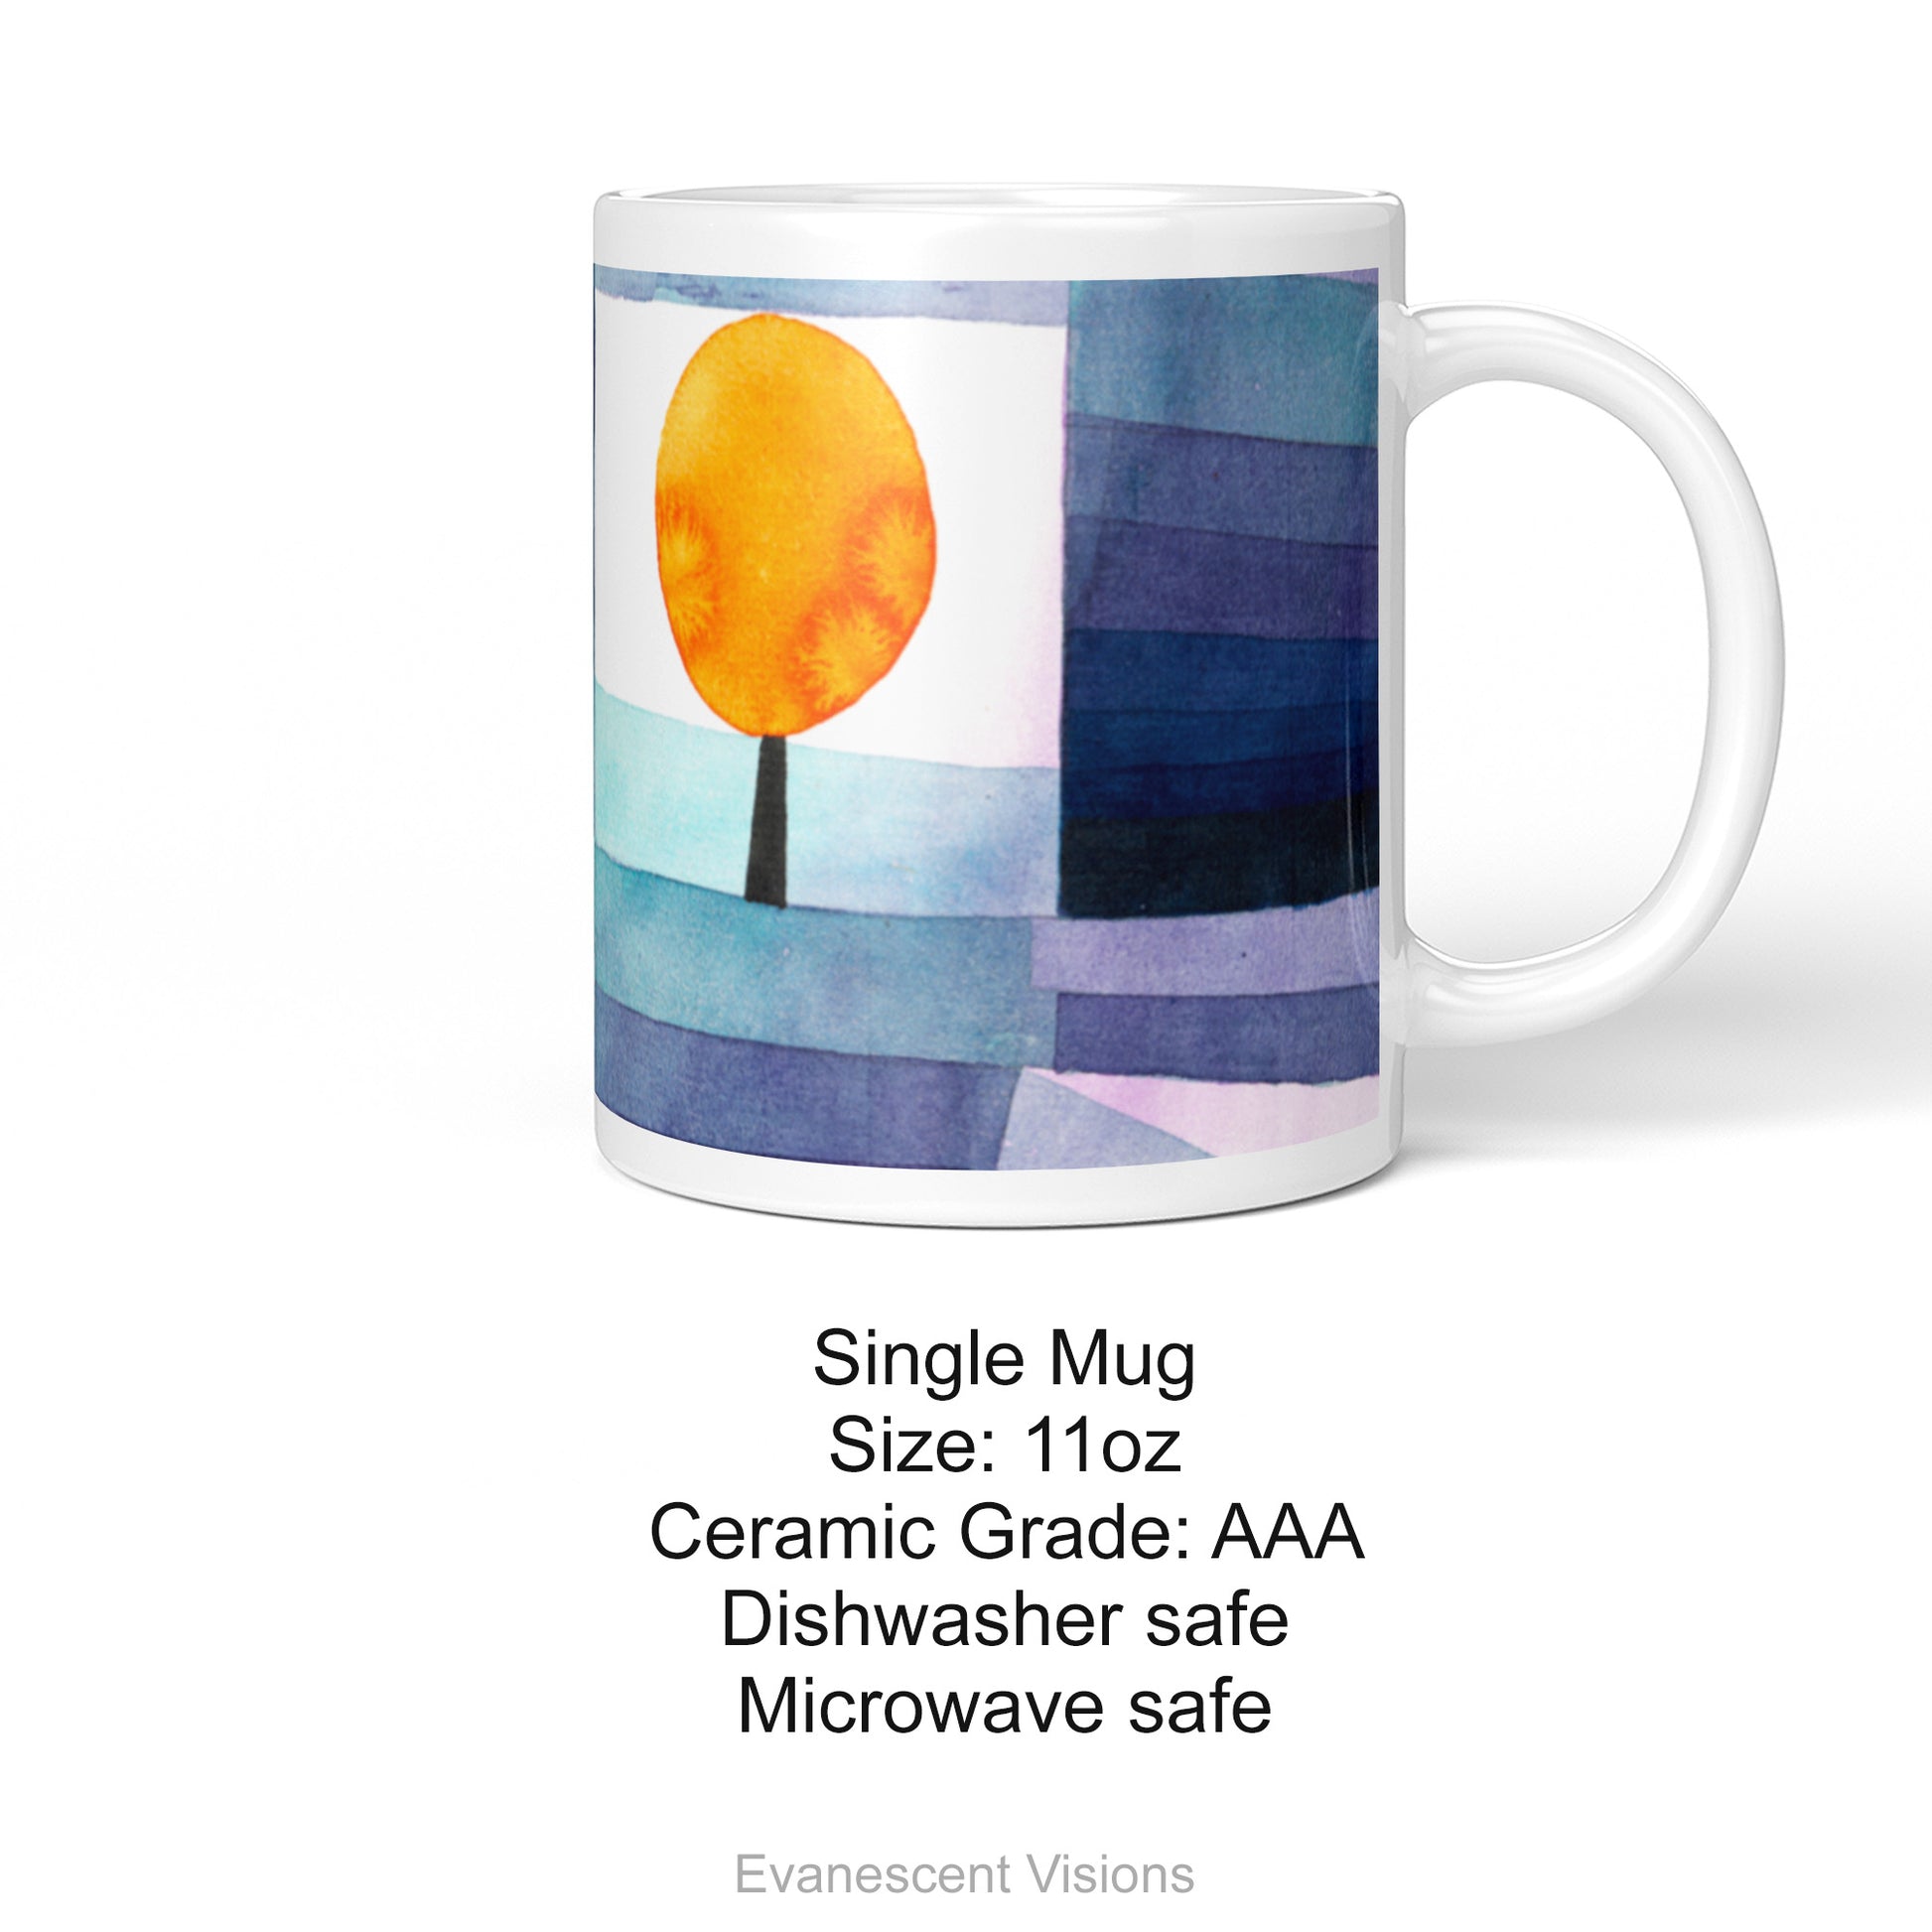 Prodcut details for the Blue Abstract Art Ceramic Mug